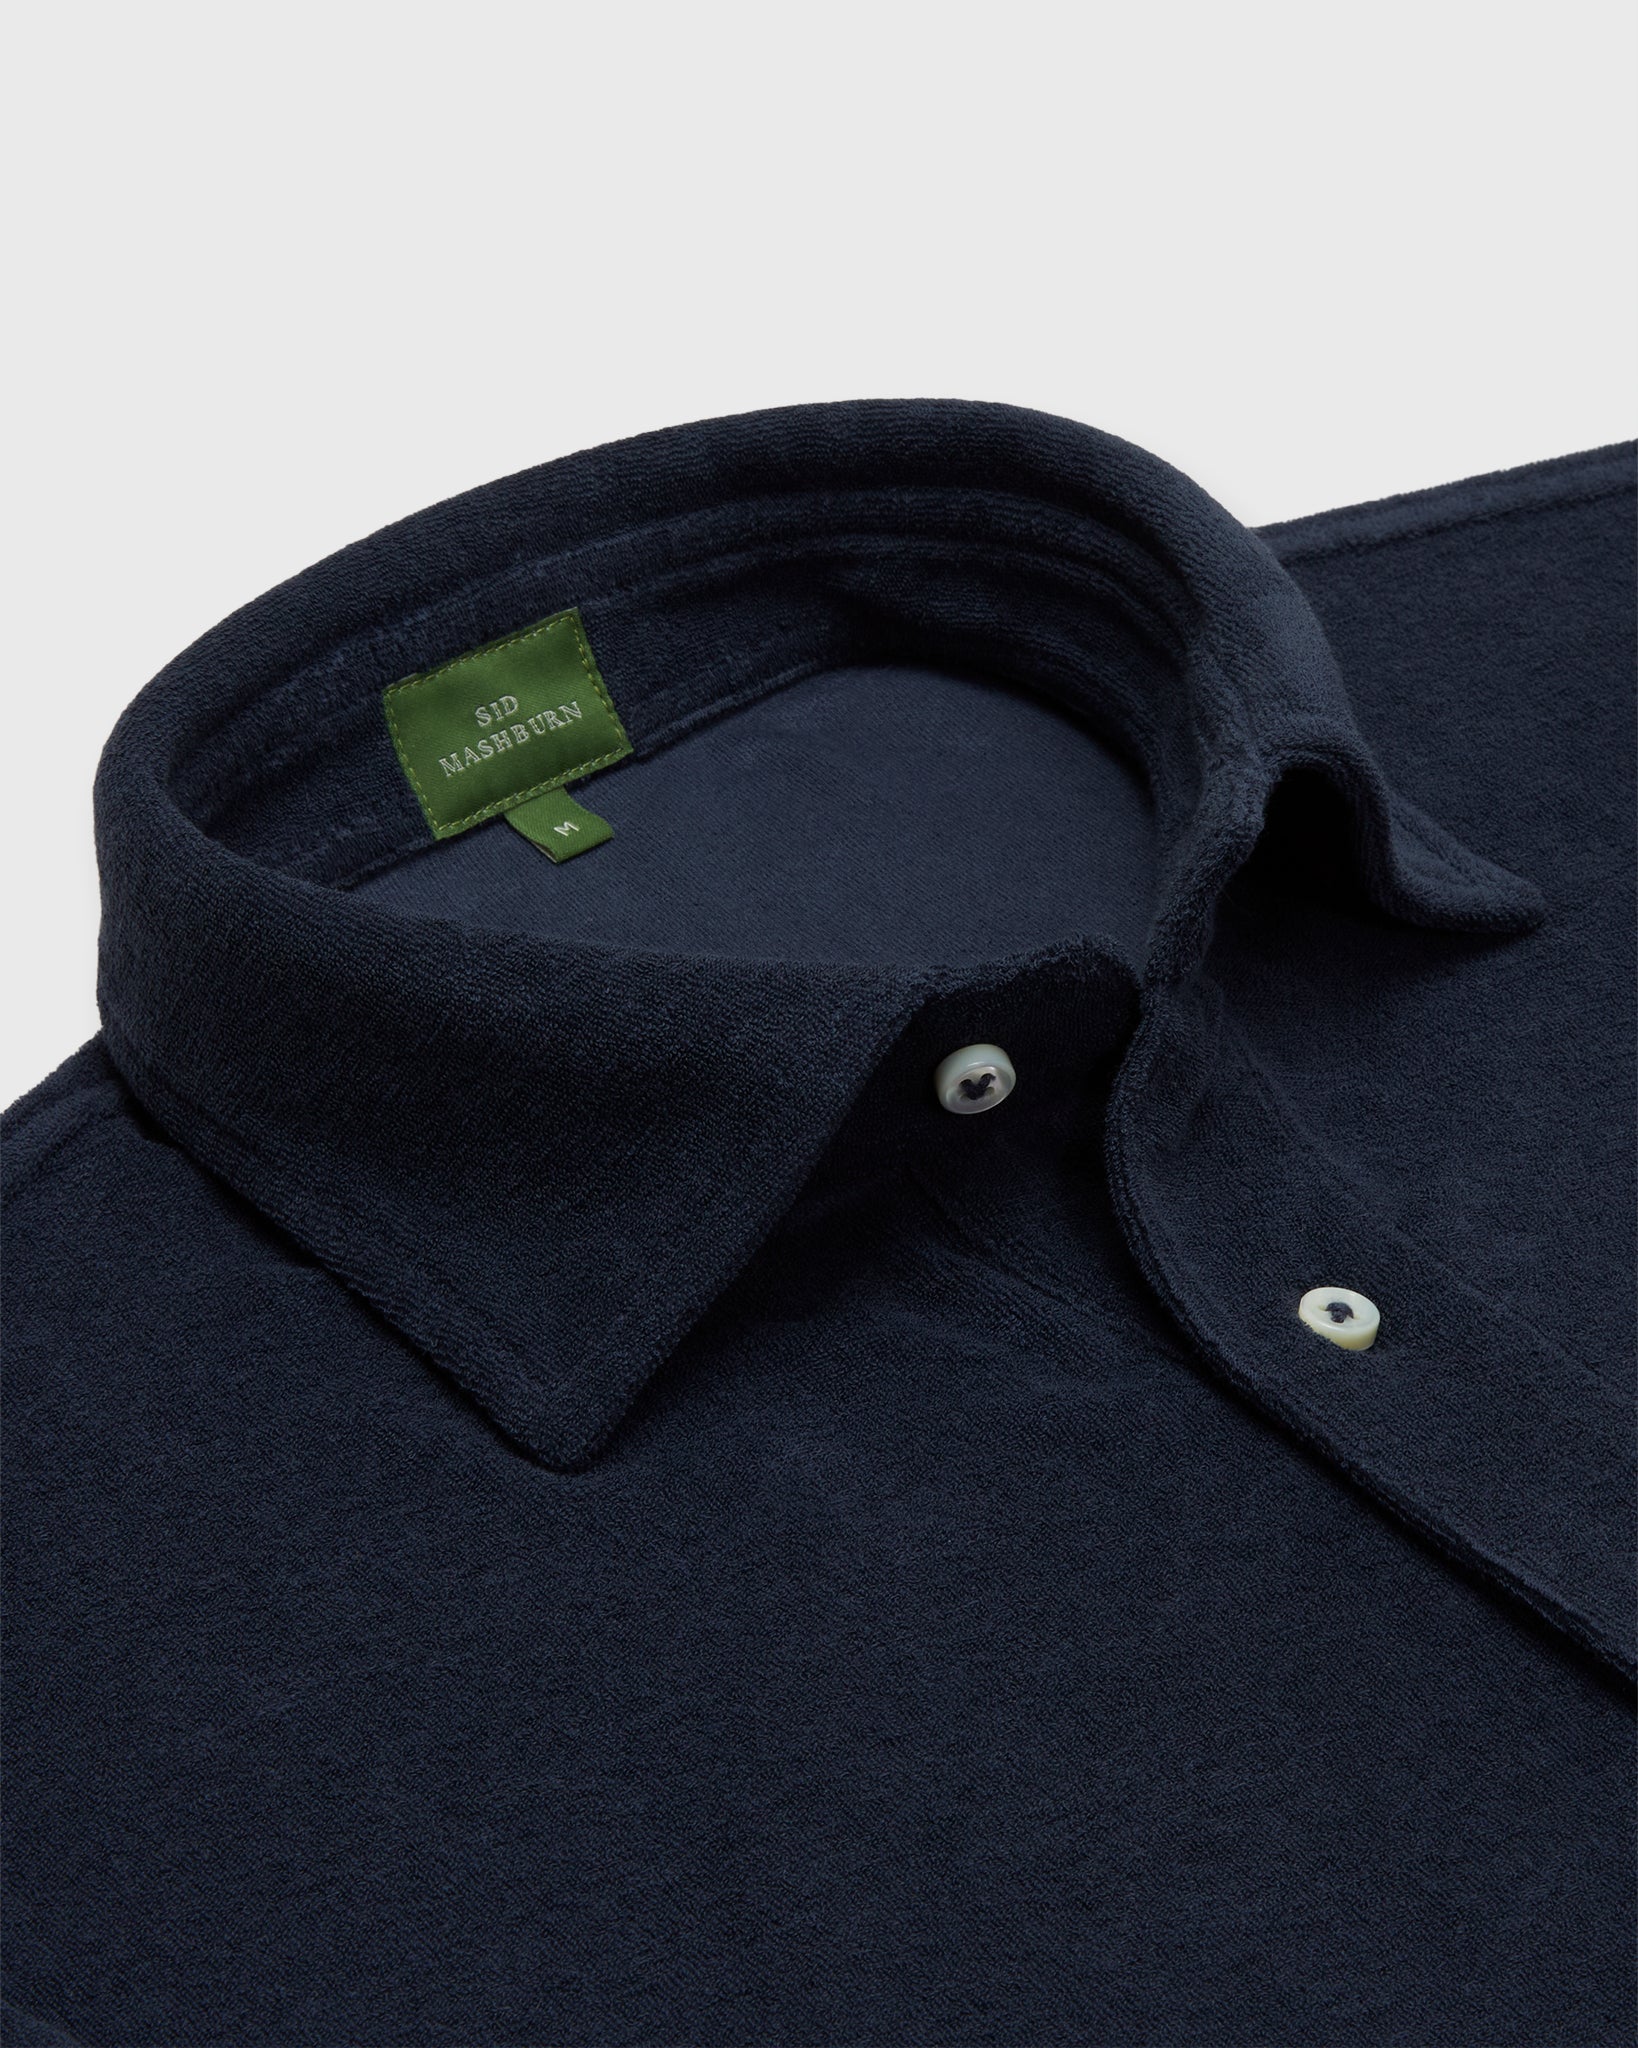 Short-Sleeved Polo in Navy Terry